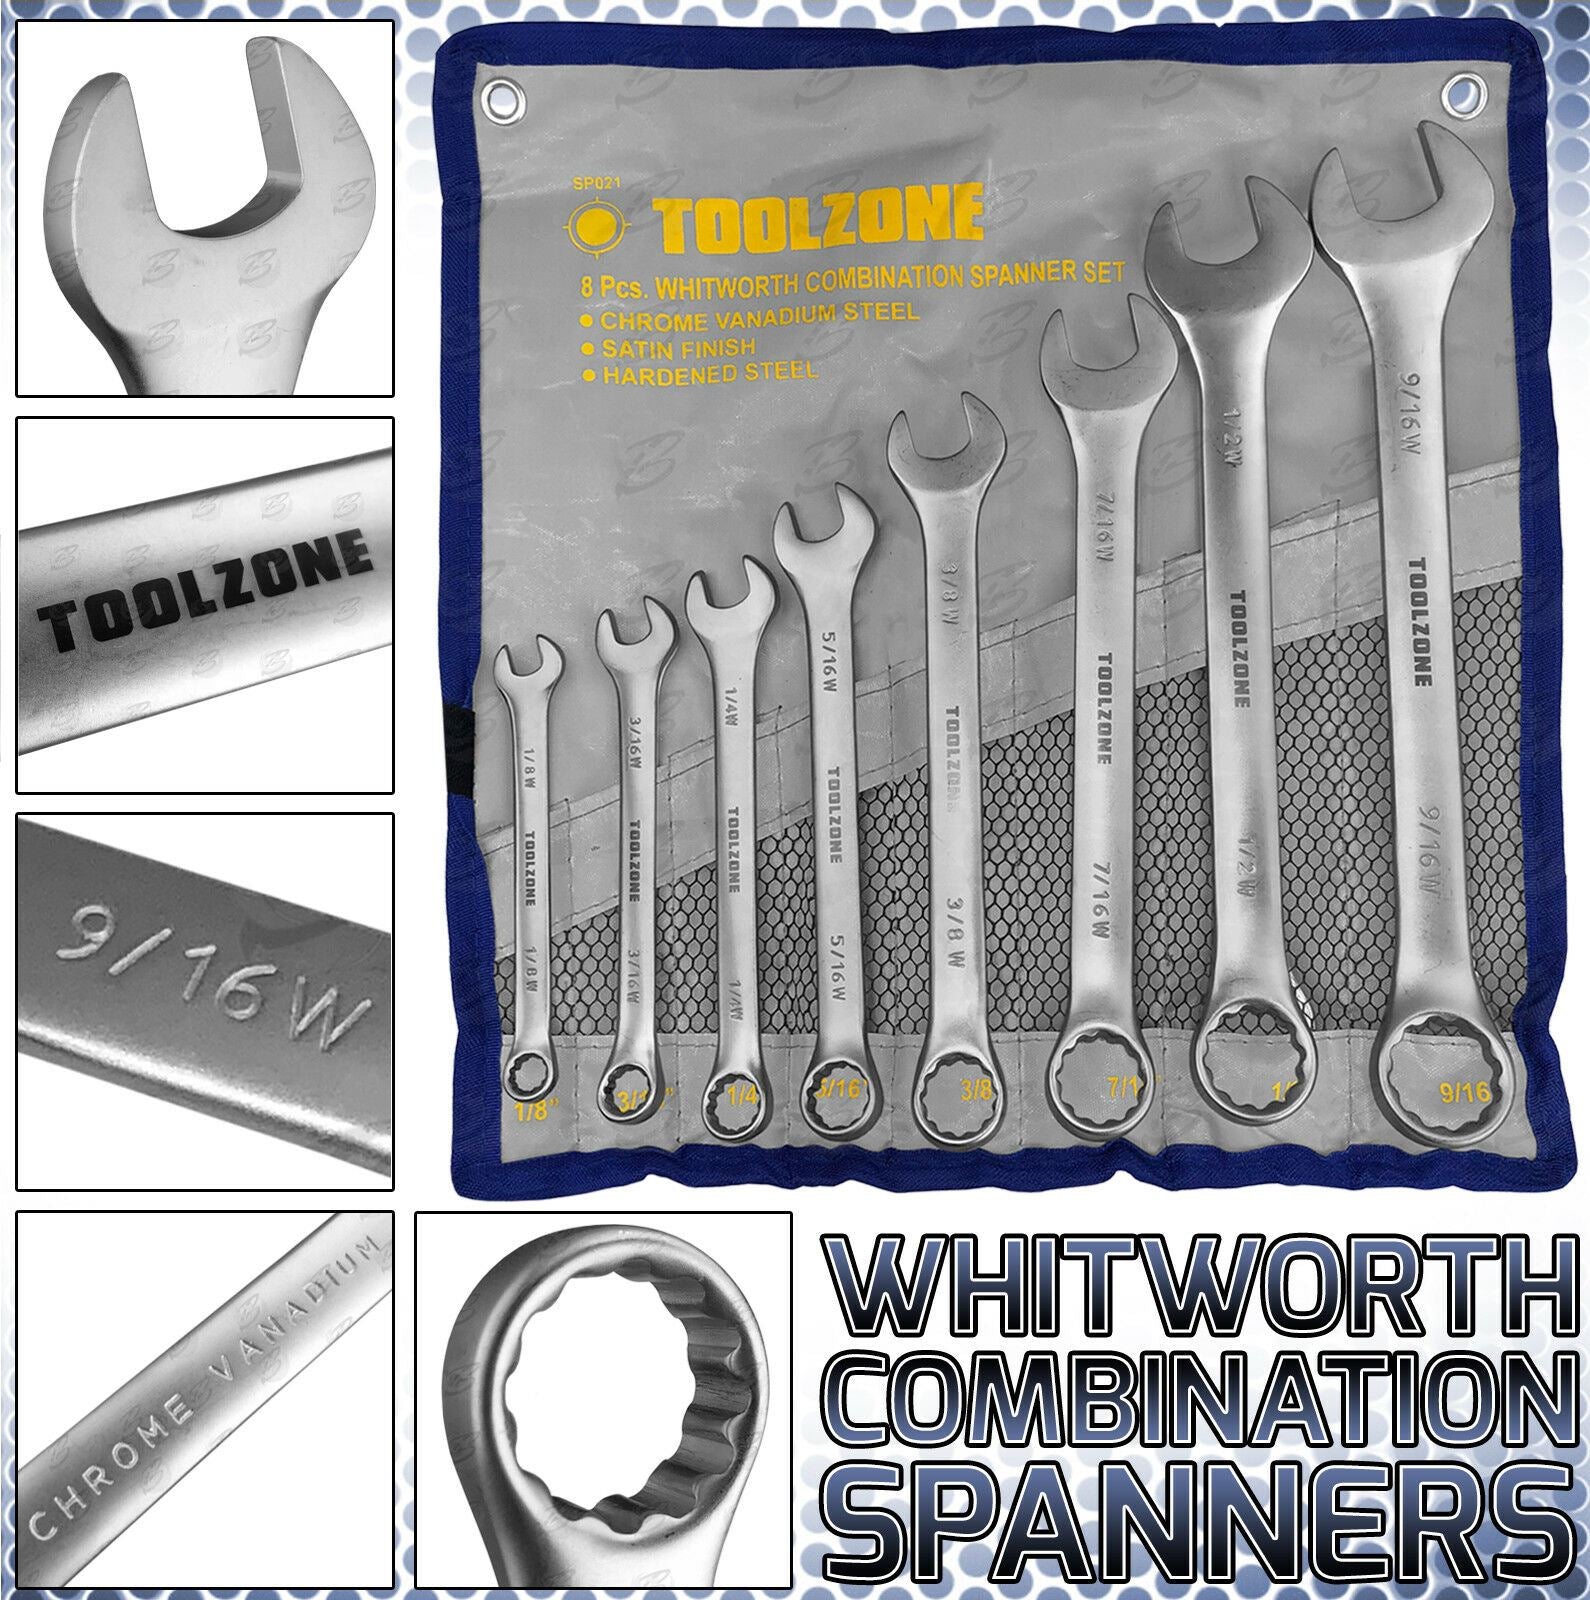 TOOLZONE 8PCS WHITWORTH COMBINATION SPANNERS 1/8" - 9/16"